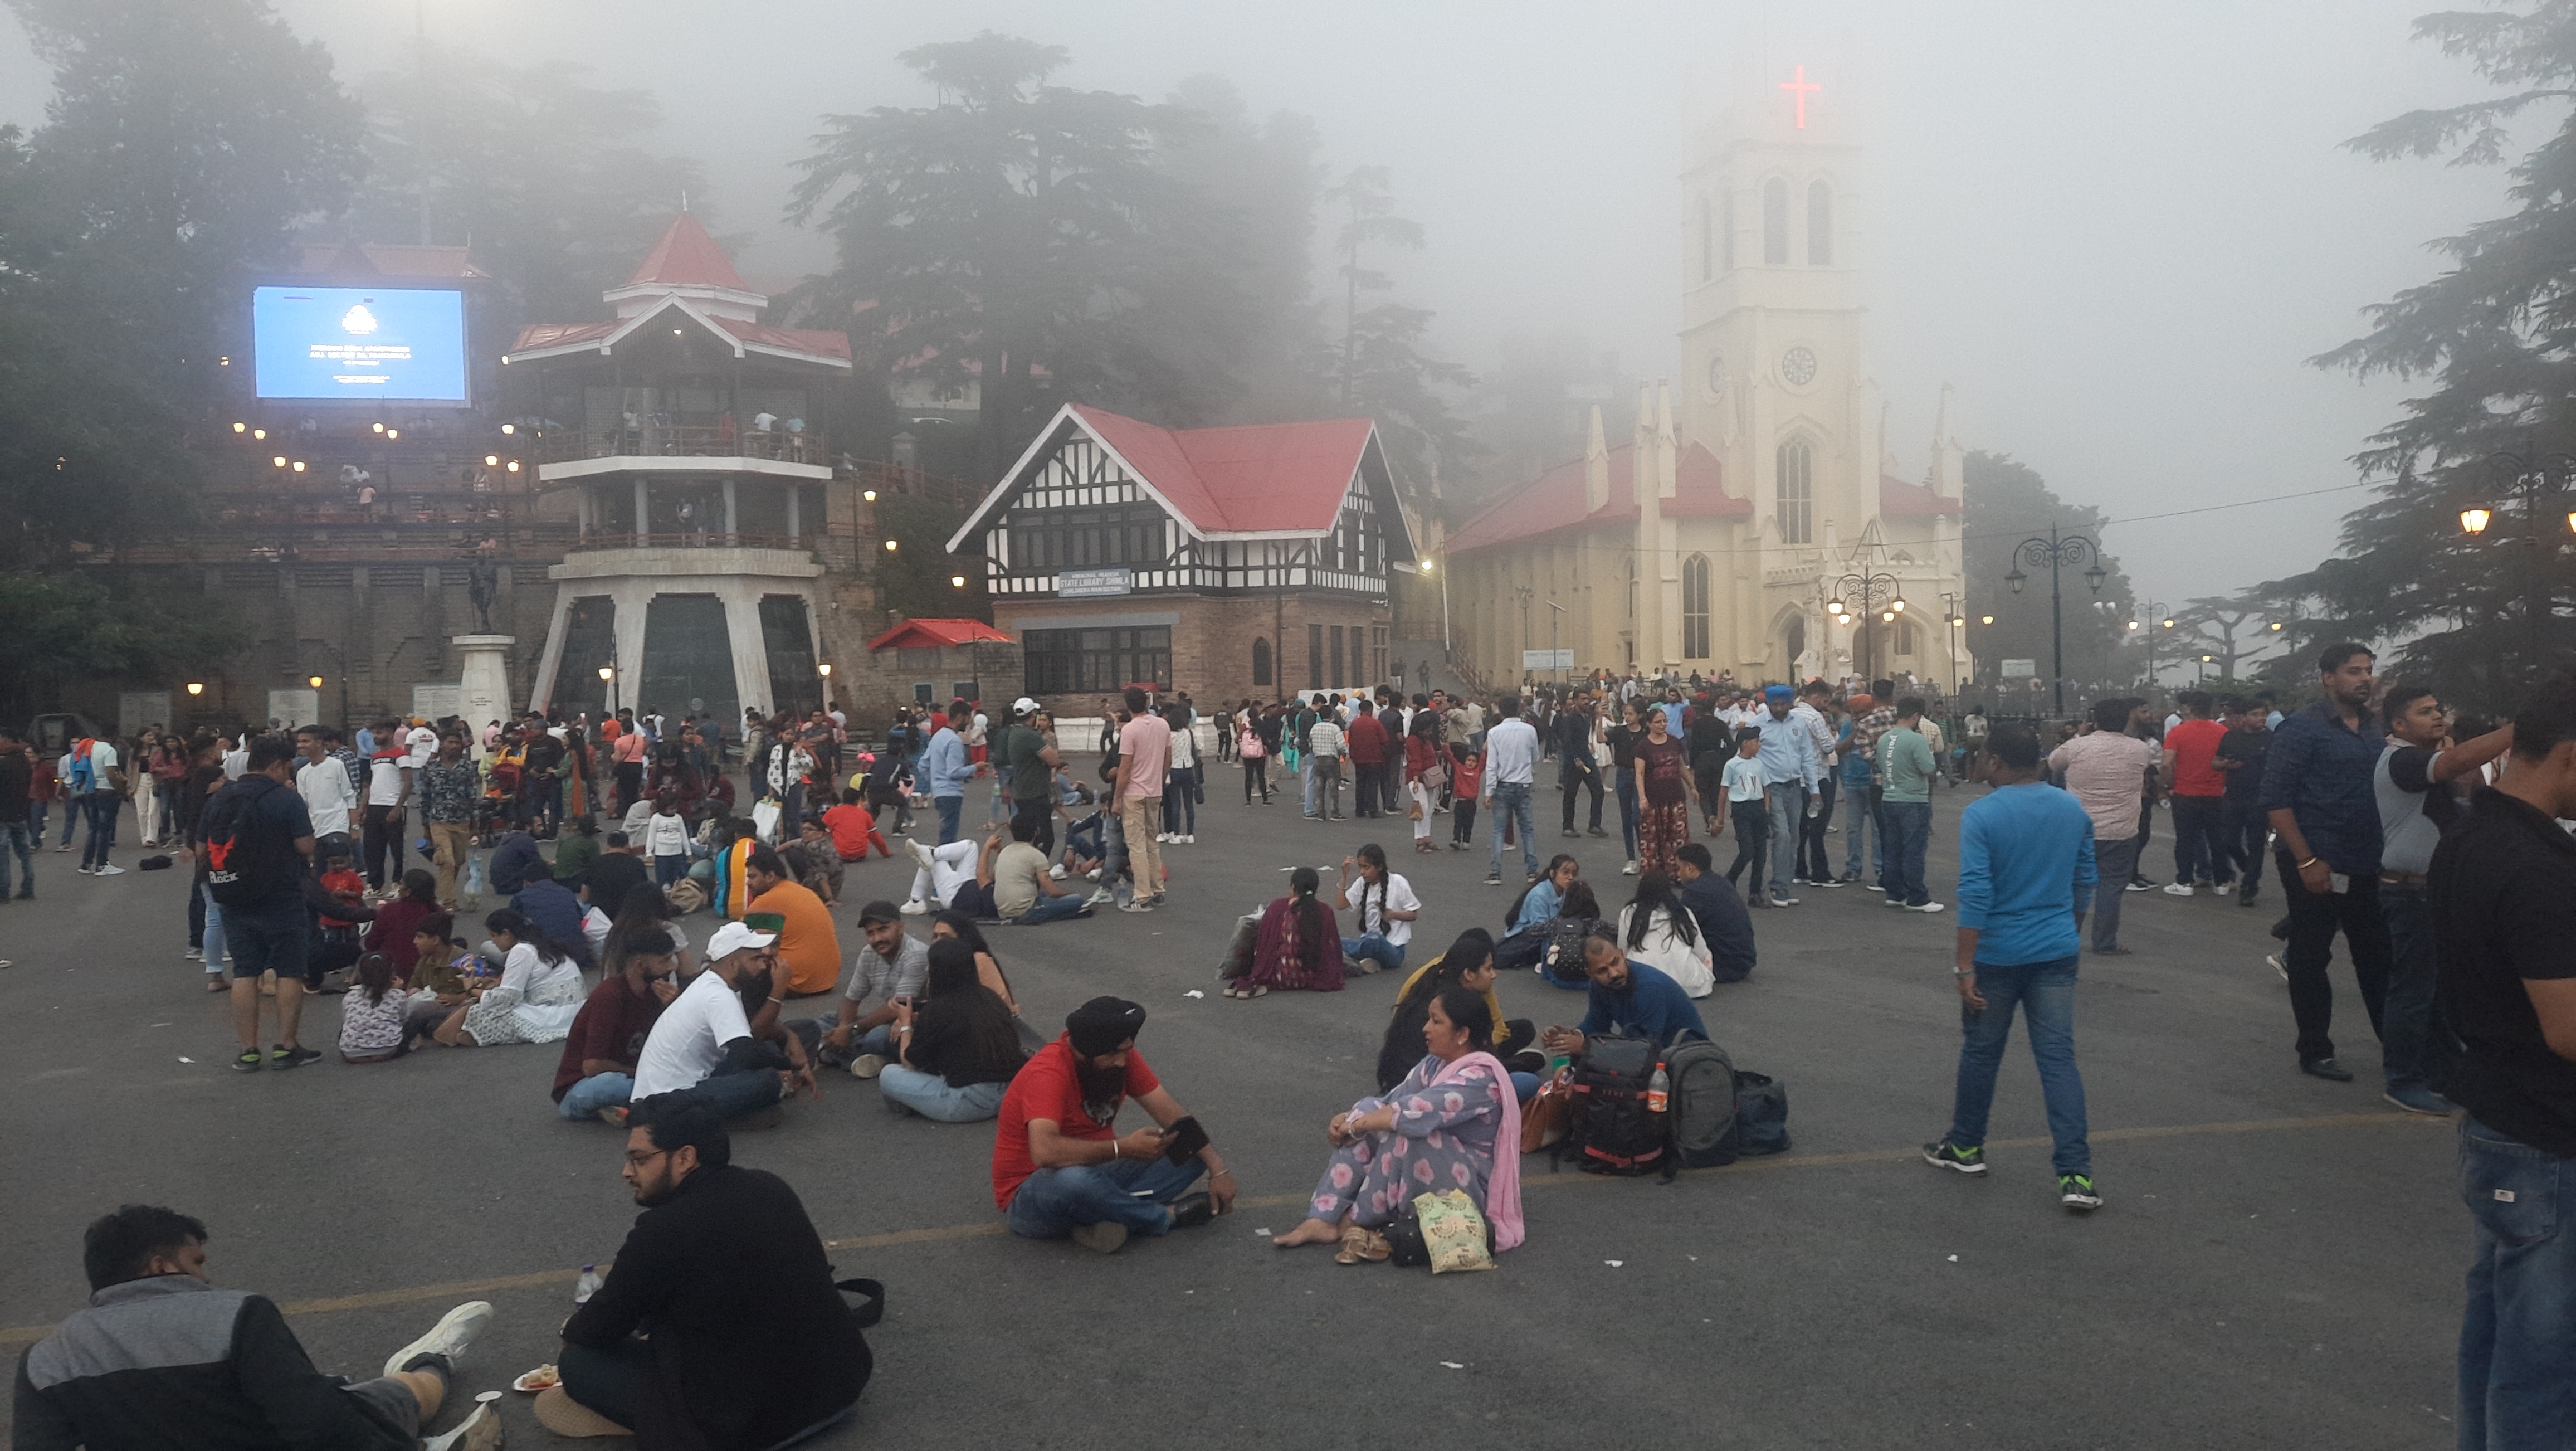 Tourist gathering in Shimla over the weekend